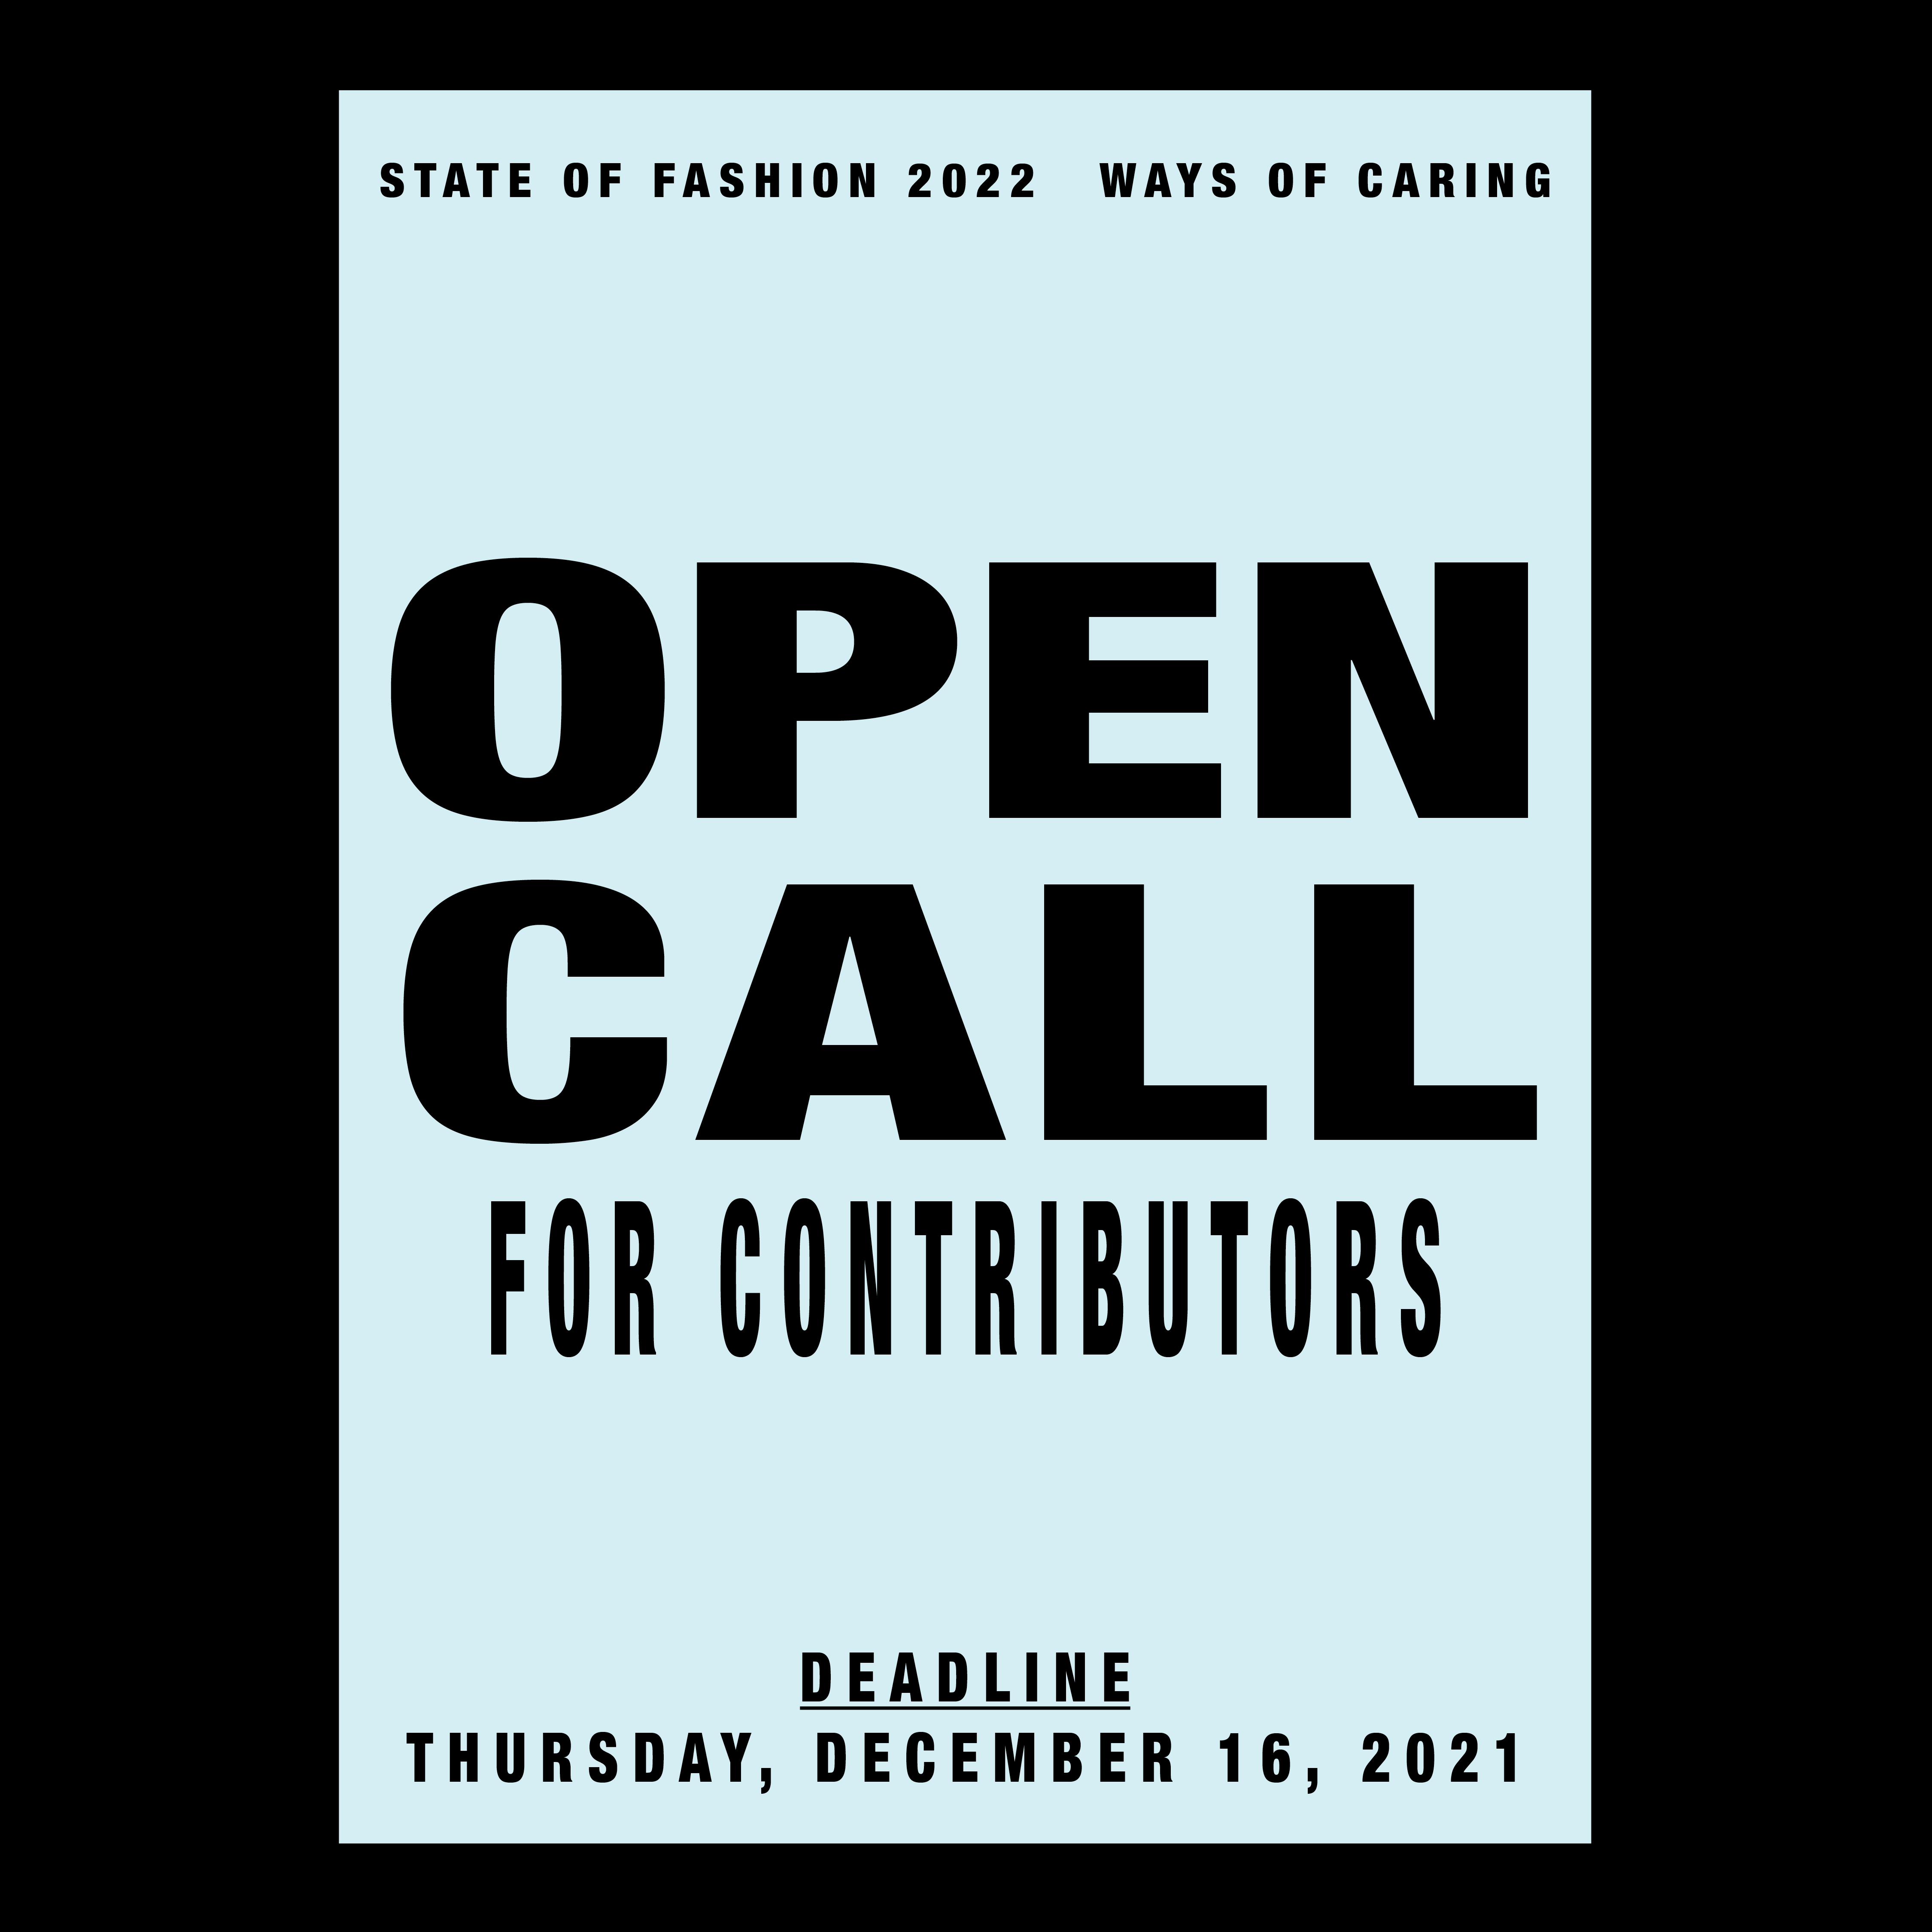 Open Call for Contributors by Aimy Eyzenbach - Creative Work